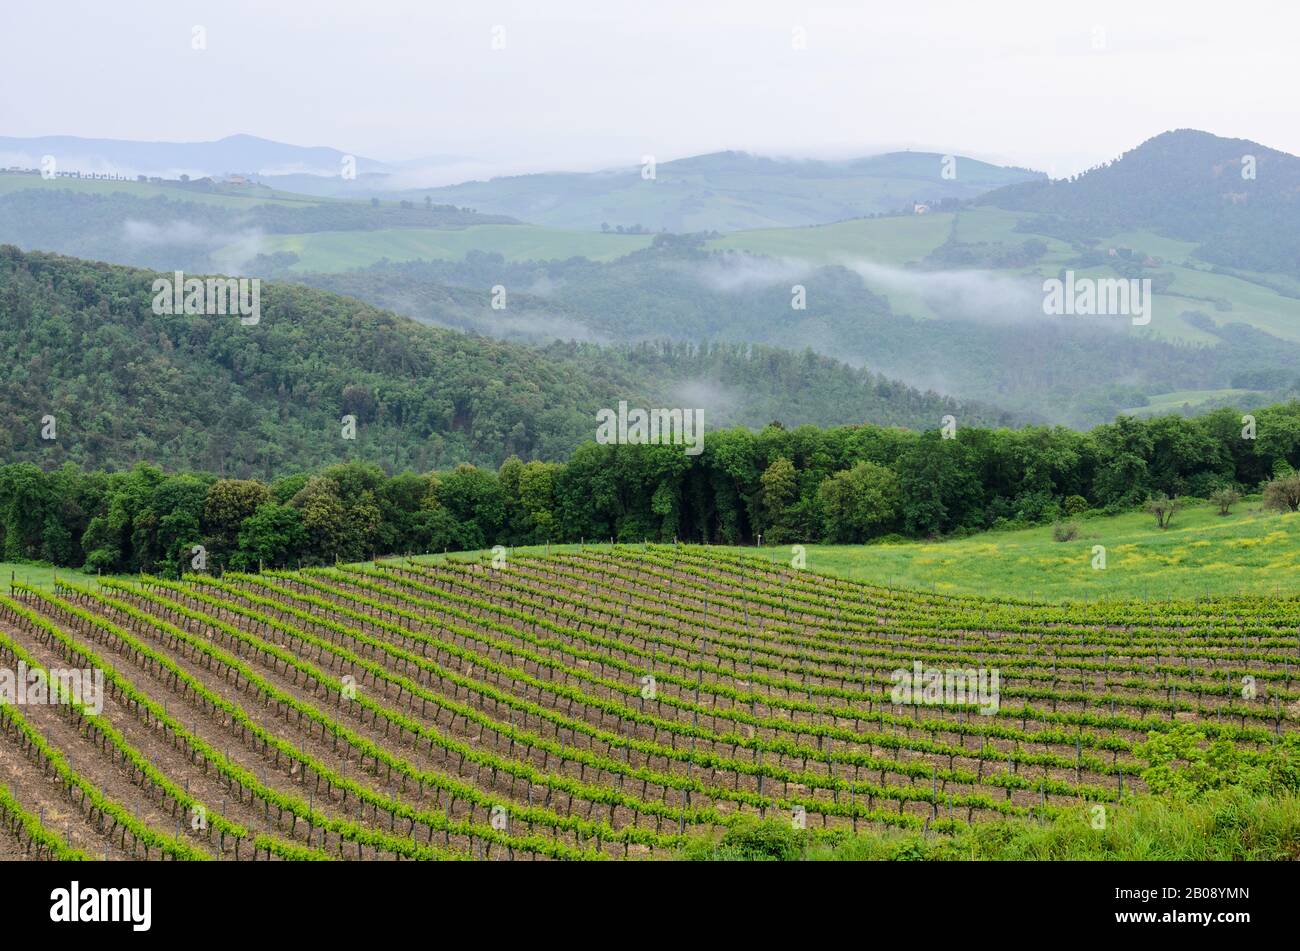 The rolling hills of Tuscany, Italy with a vineyard in the foreground and tree lined mountains in the distance. Stock Photo